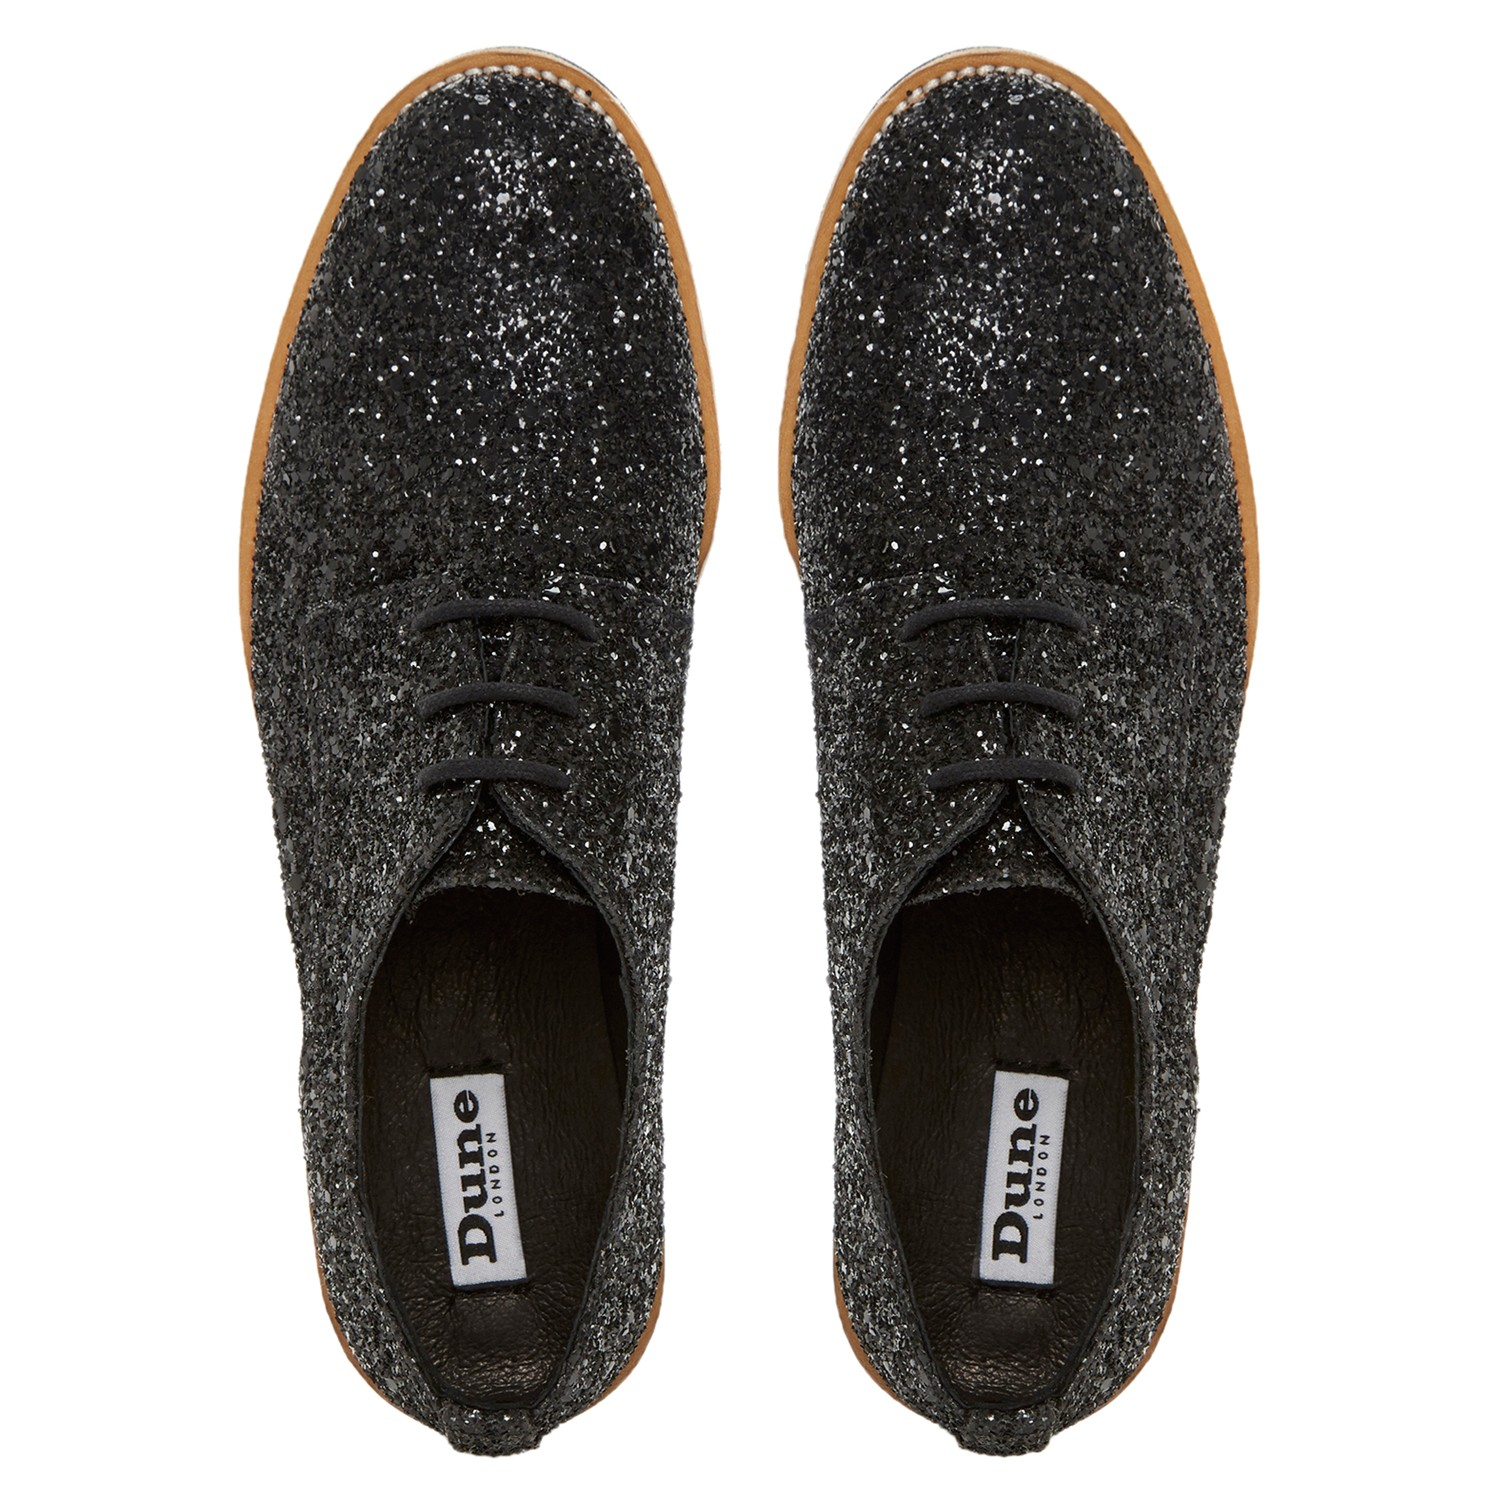 sparkly brogues